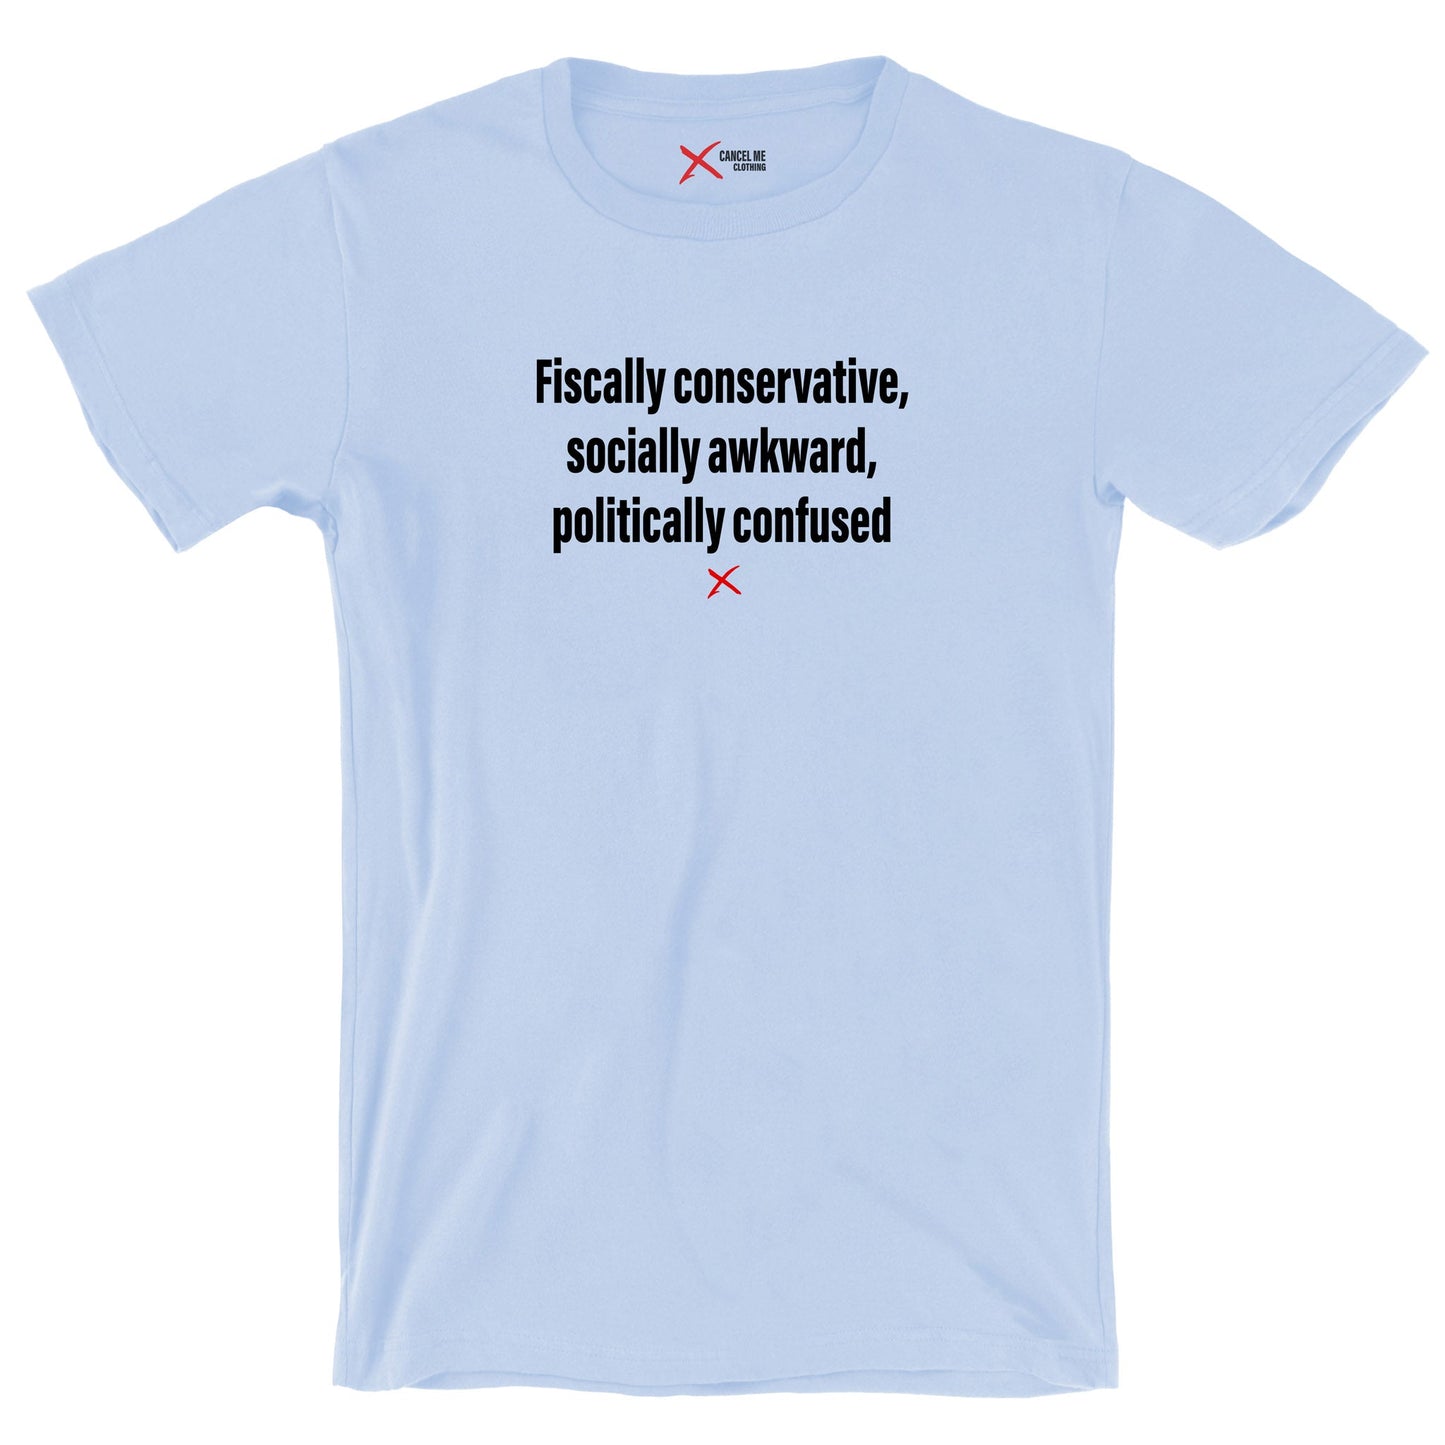 Fiscally conservative, socially awkward, politically confused - Shirt